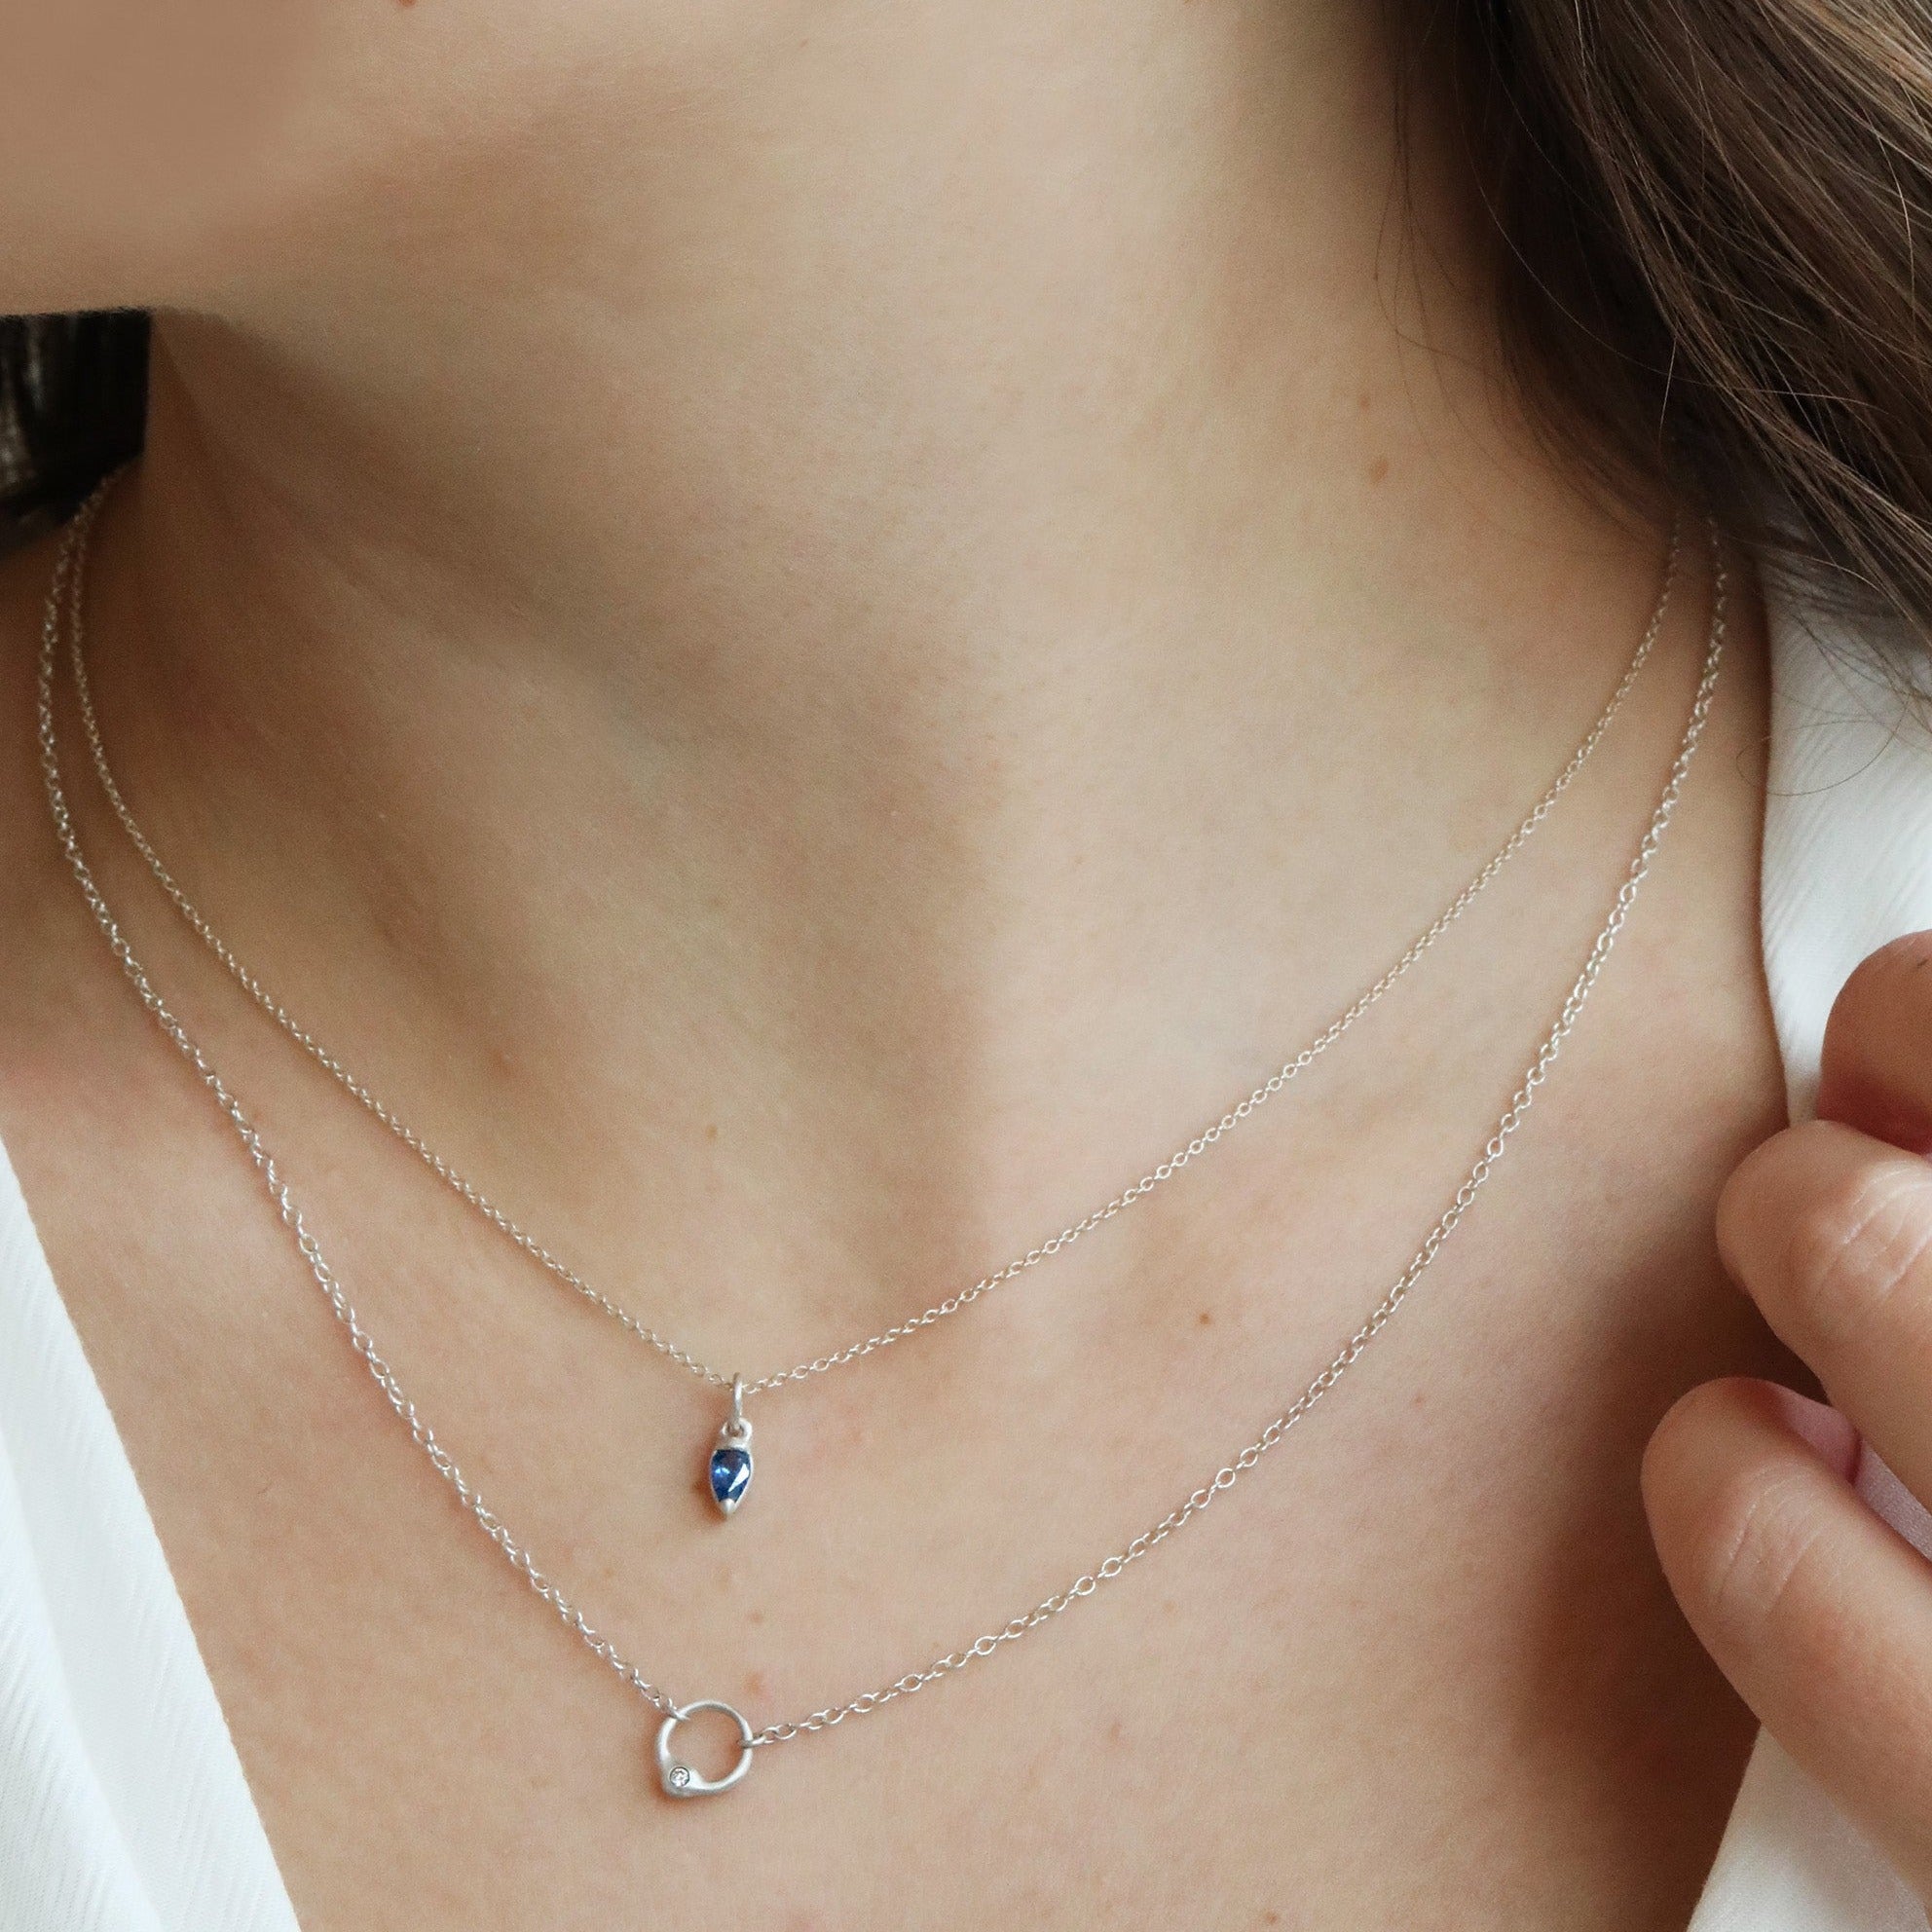 Sterling Silver and Pear-Shaped Blue Sapphire Pendant Necklace. - Peridot Fine Jewelry - dan-yell